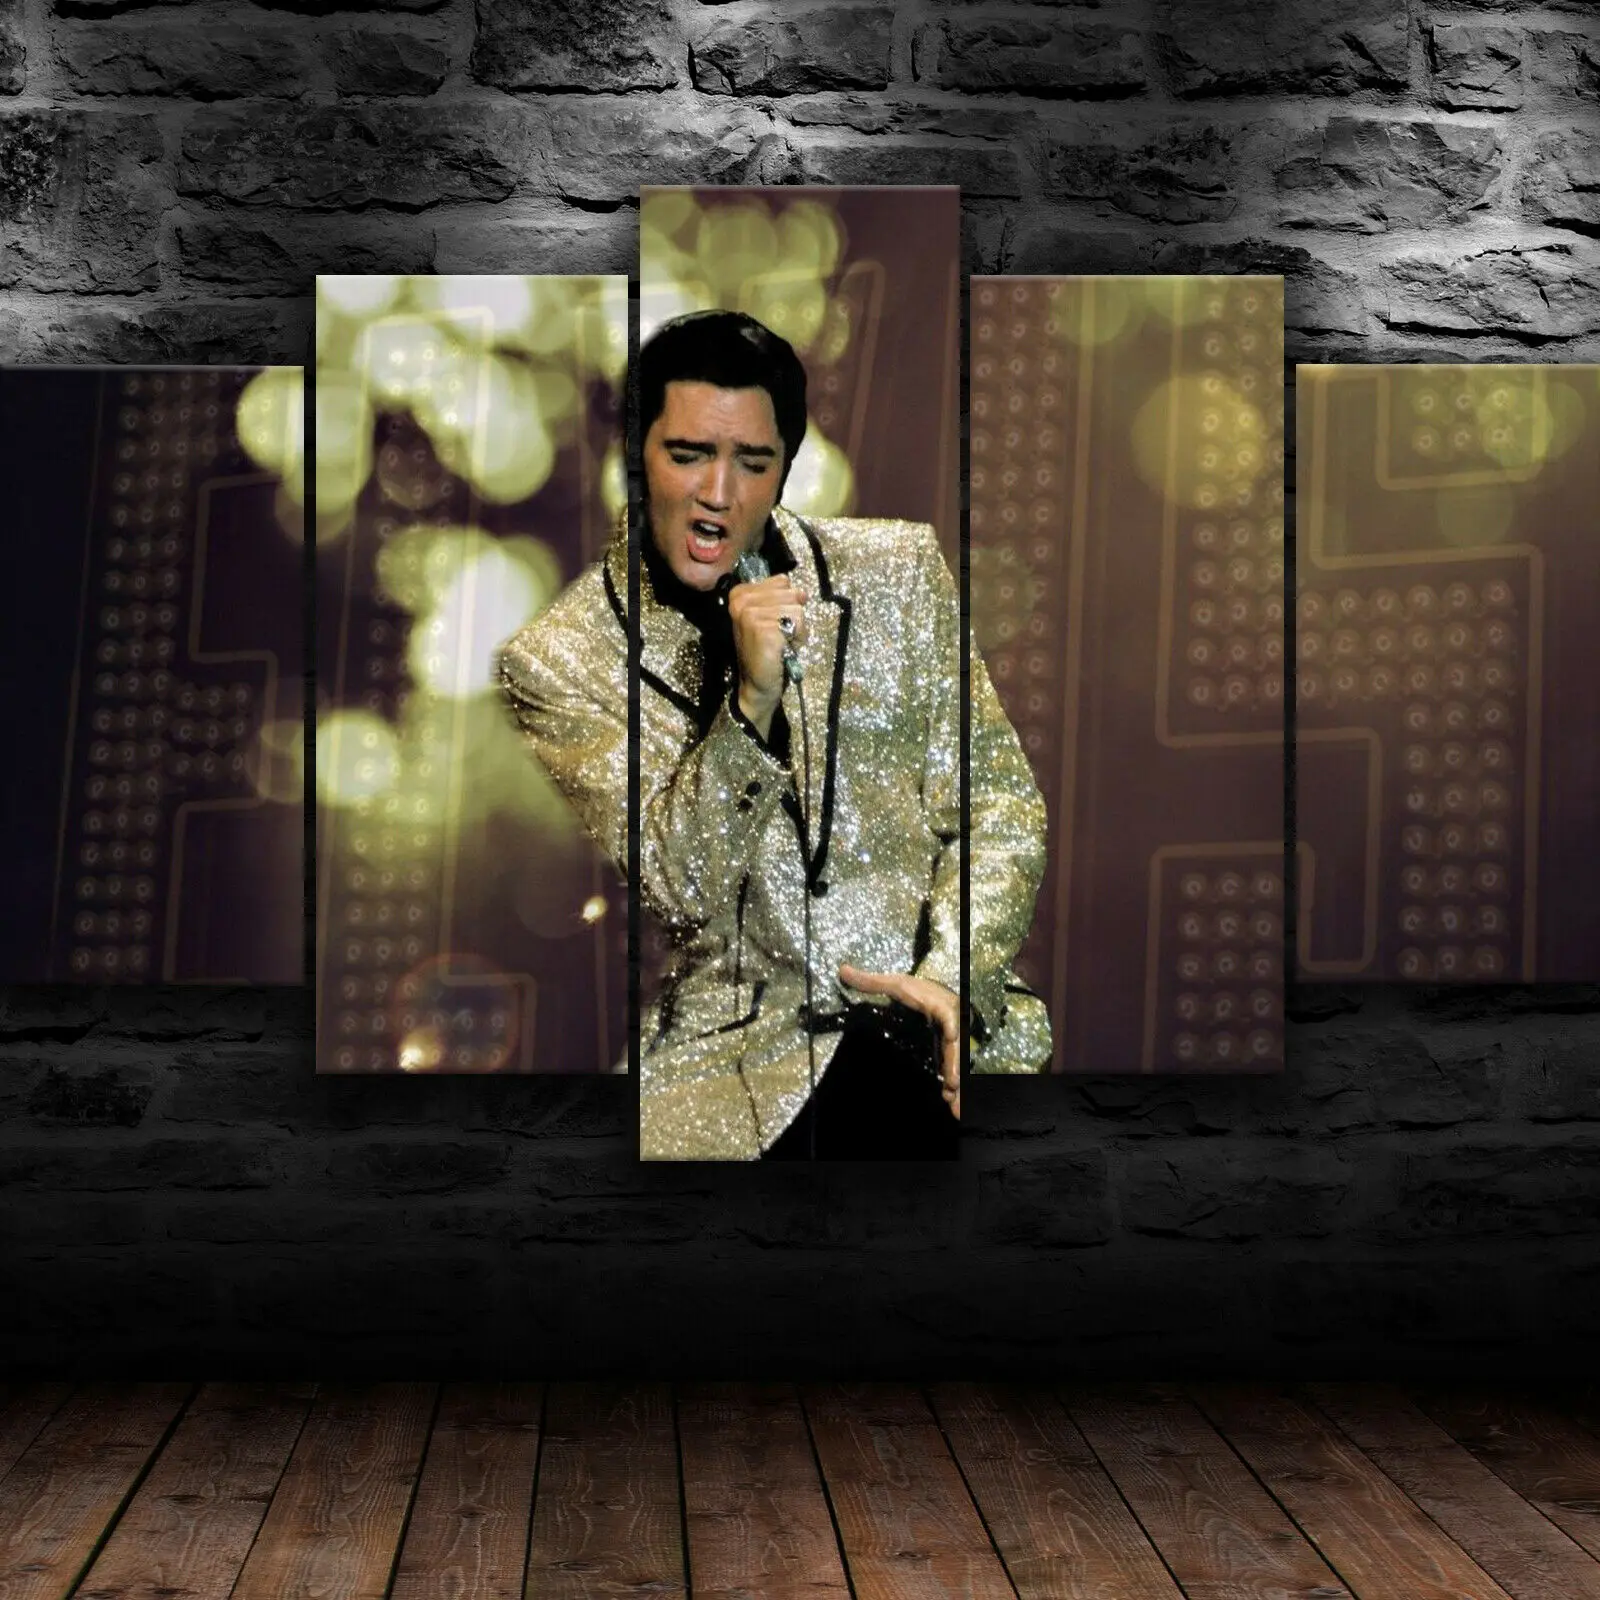 

Elvis Presley Rock Canvas Wall Art Singer Print Home Decor Pictures Room Decor Paintings HD Print Poster 5 Panel 5 Pieces